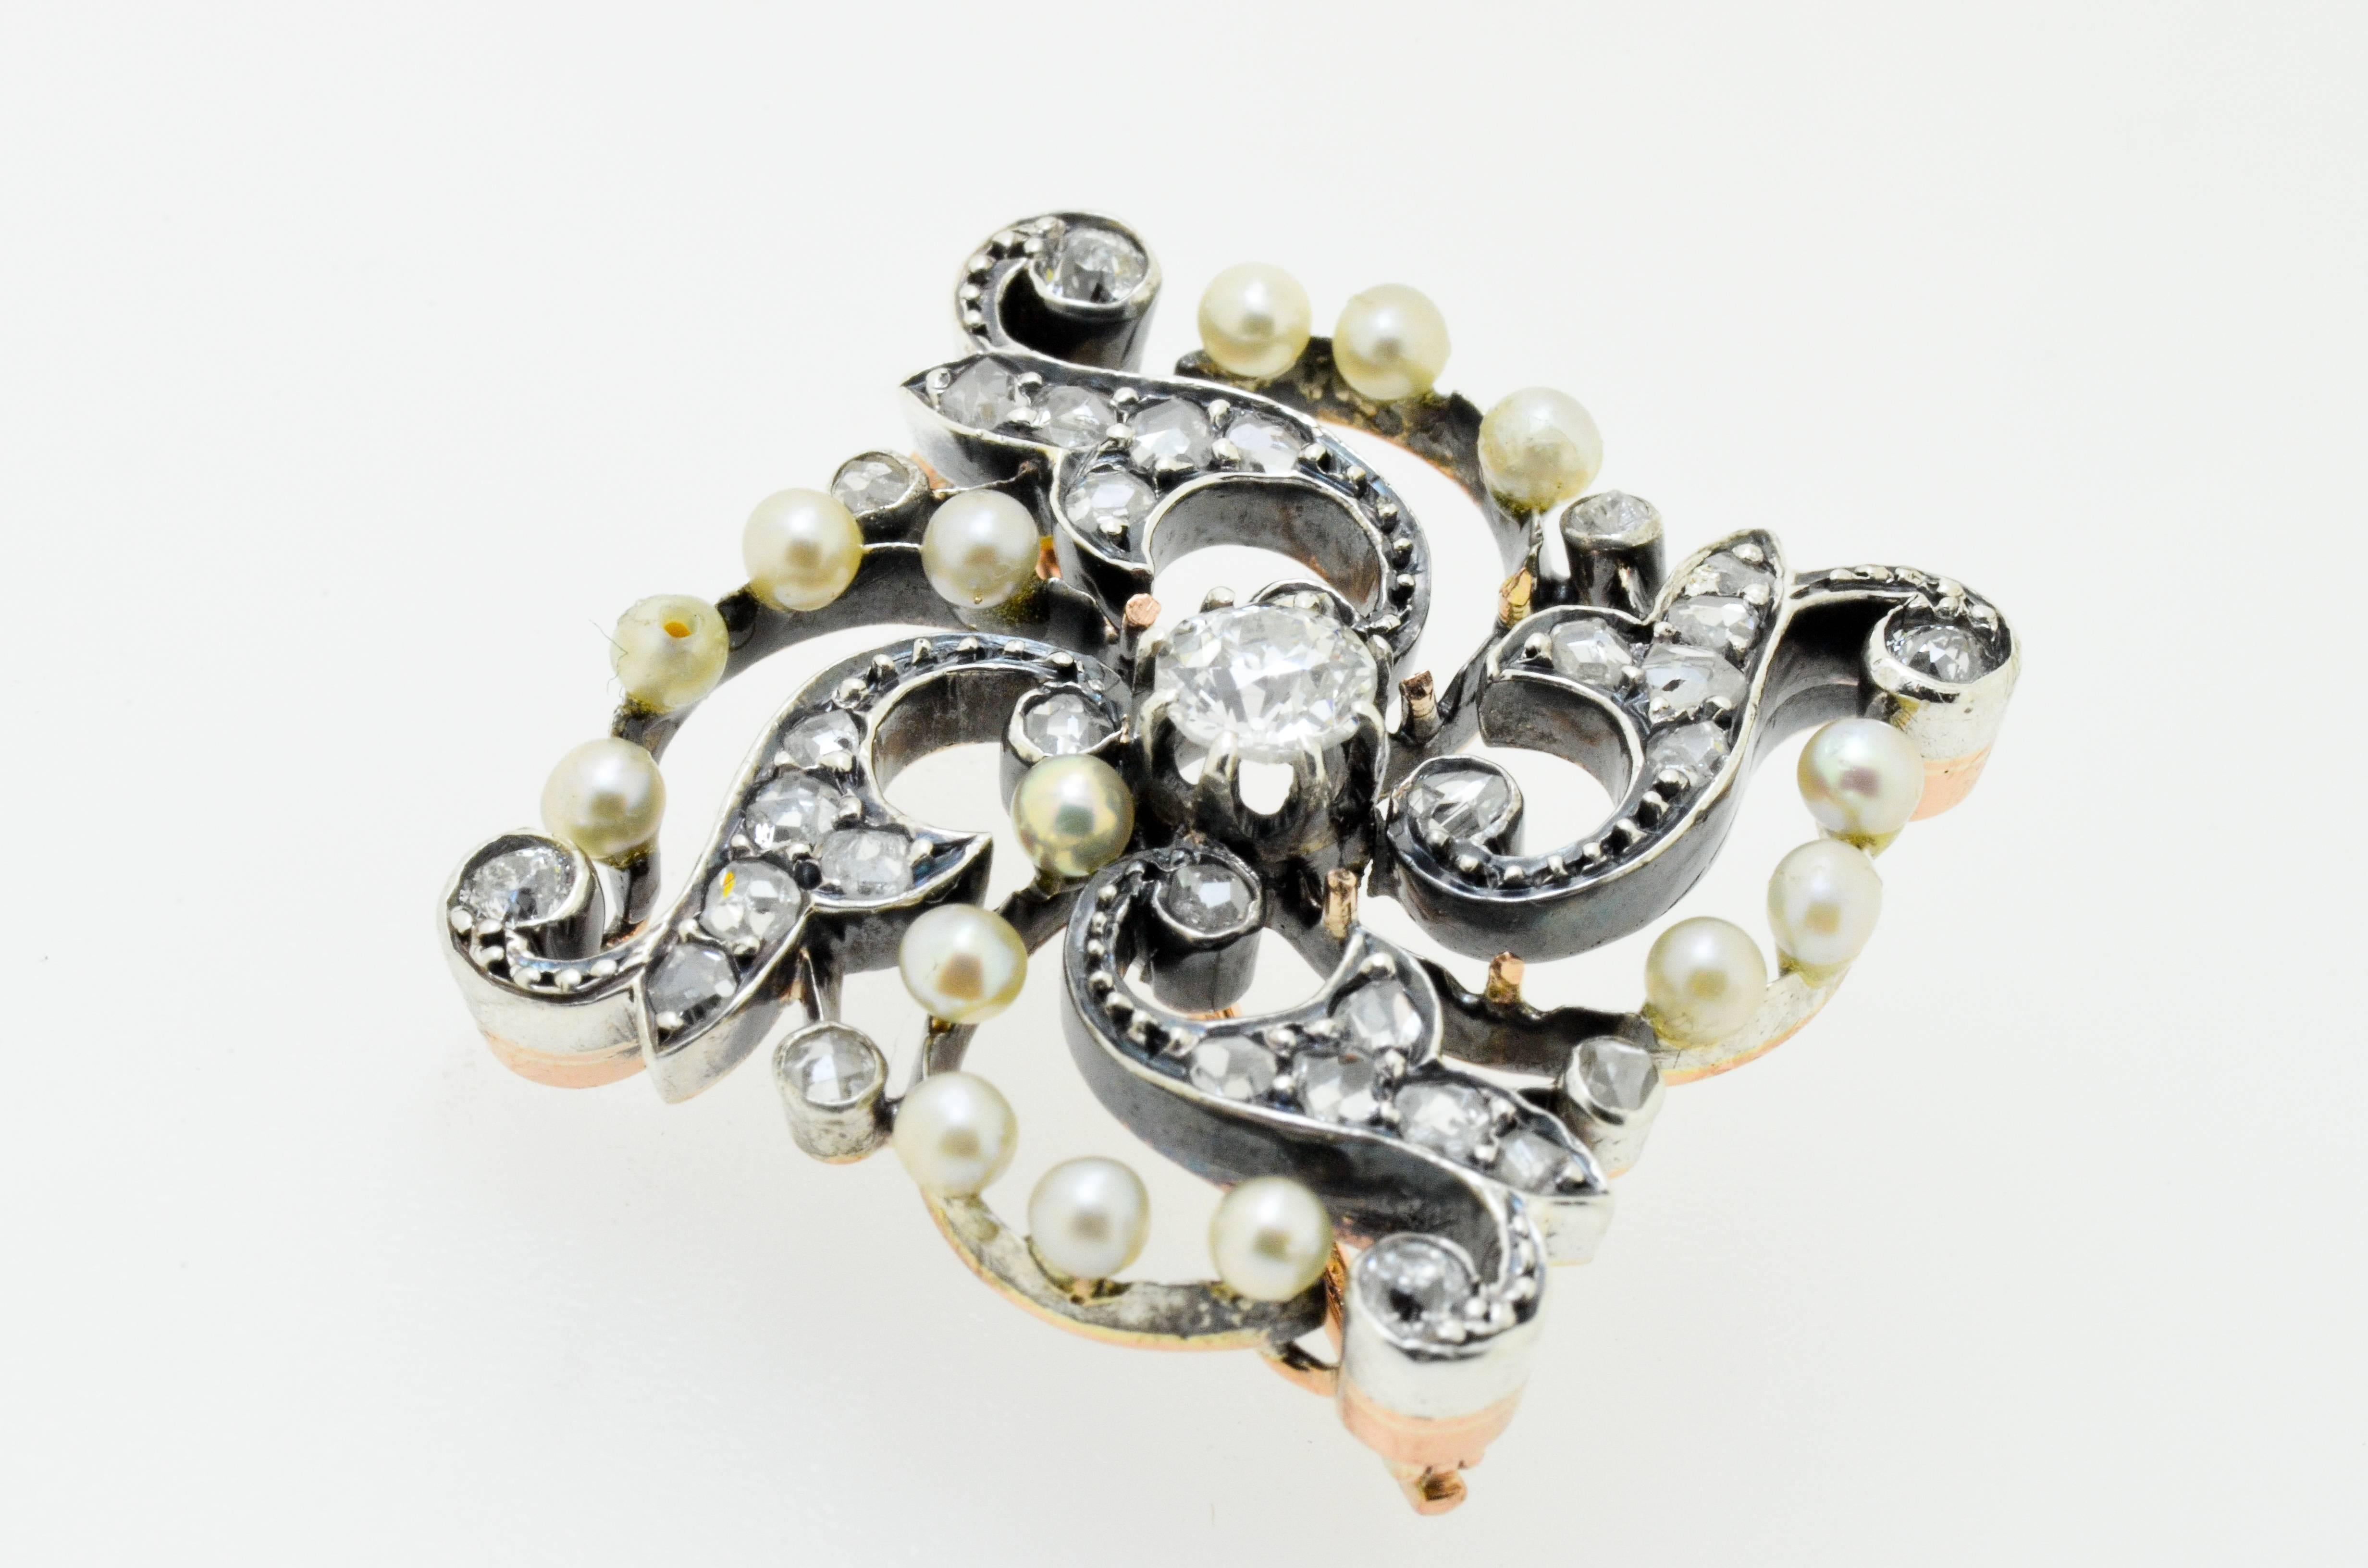 Gold and silver brooch set with a clean white 0.25 carat diamond centre stone and with numerous pearls and rose cut diamonds on surround.